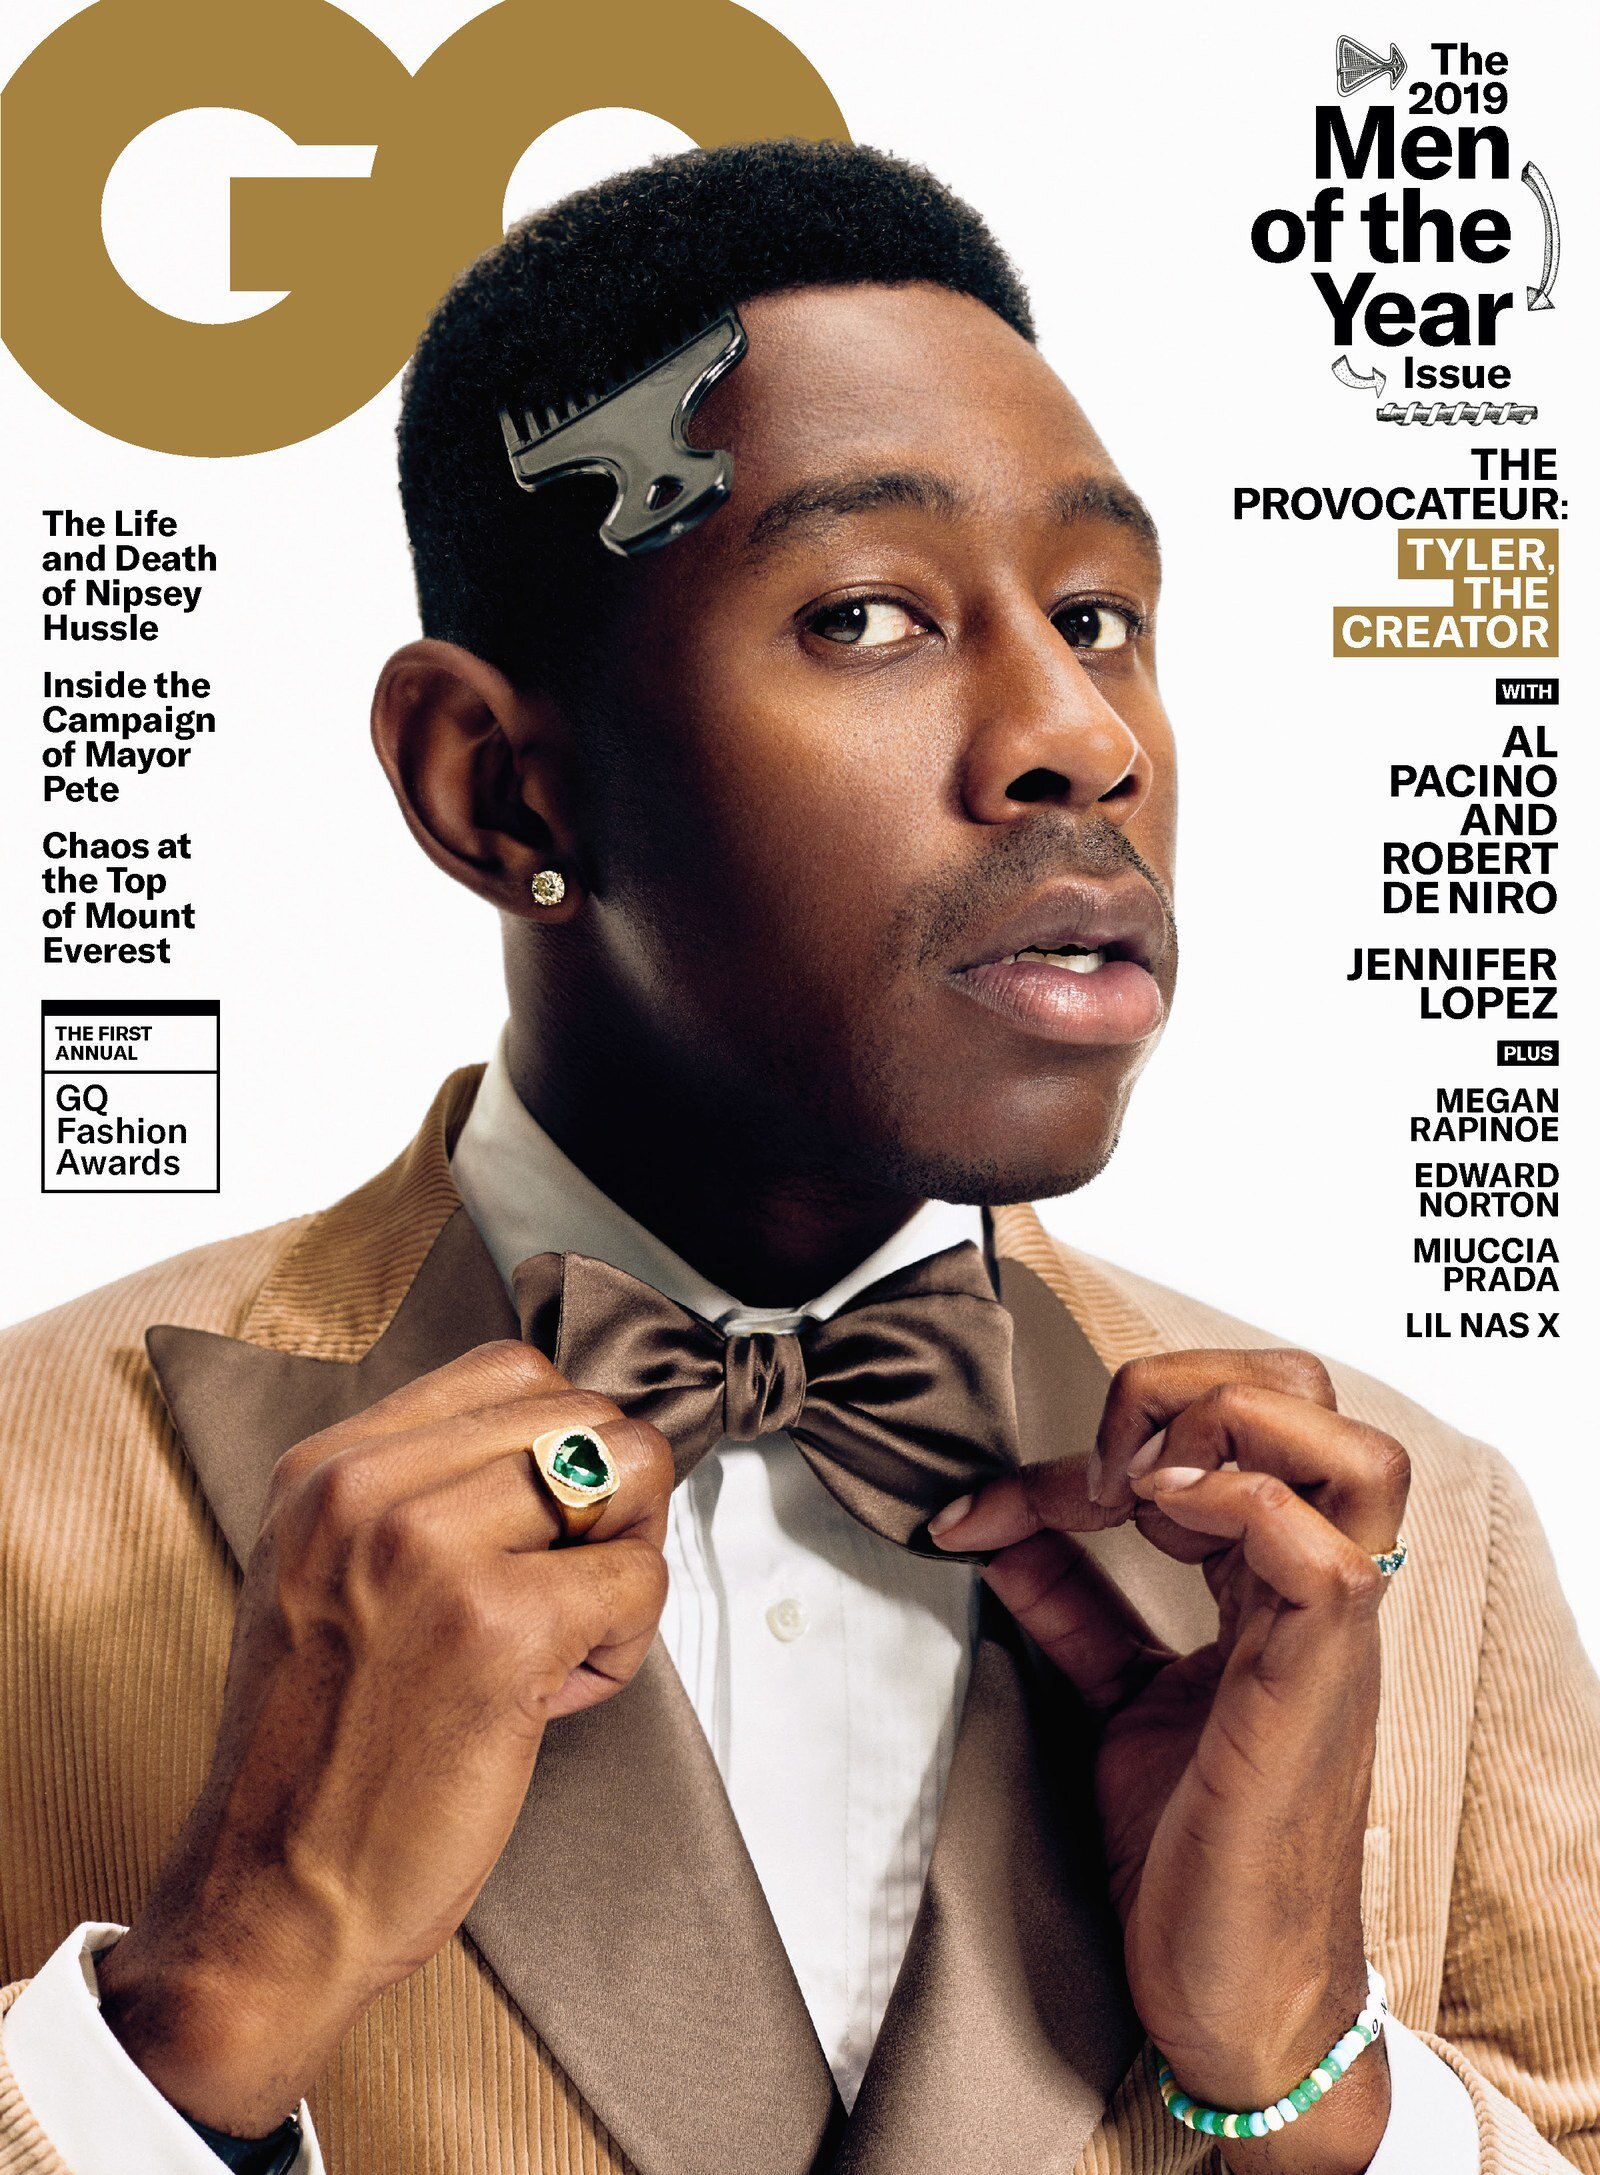 tyler-the-creator-cover-gq-men-of-the-year-2019.jpg